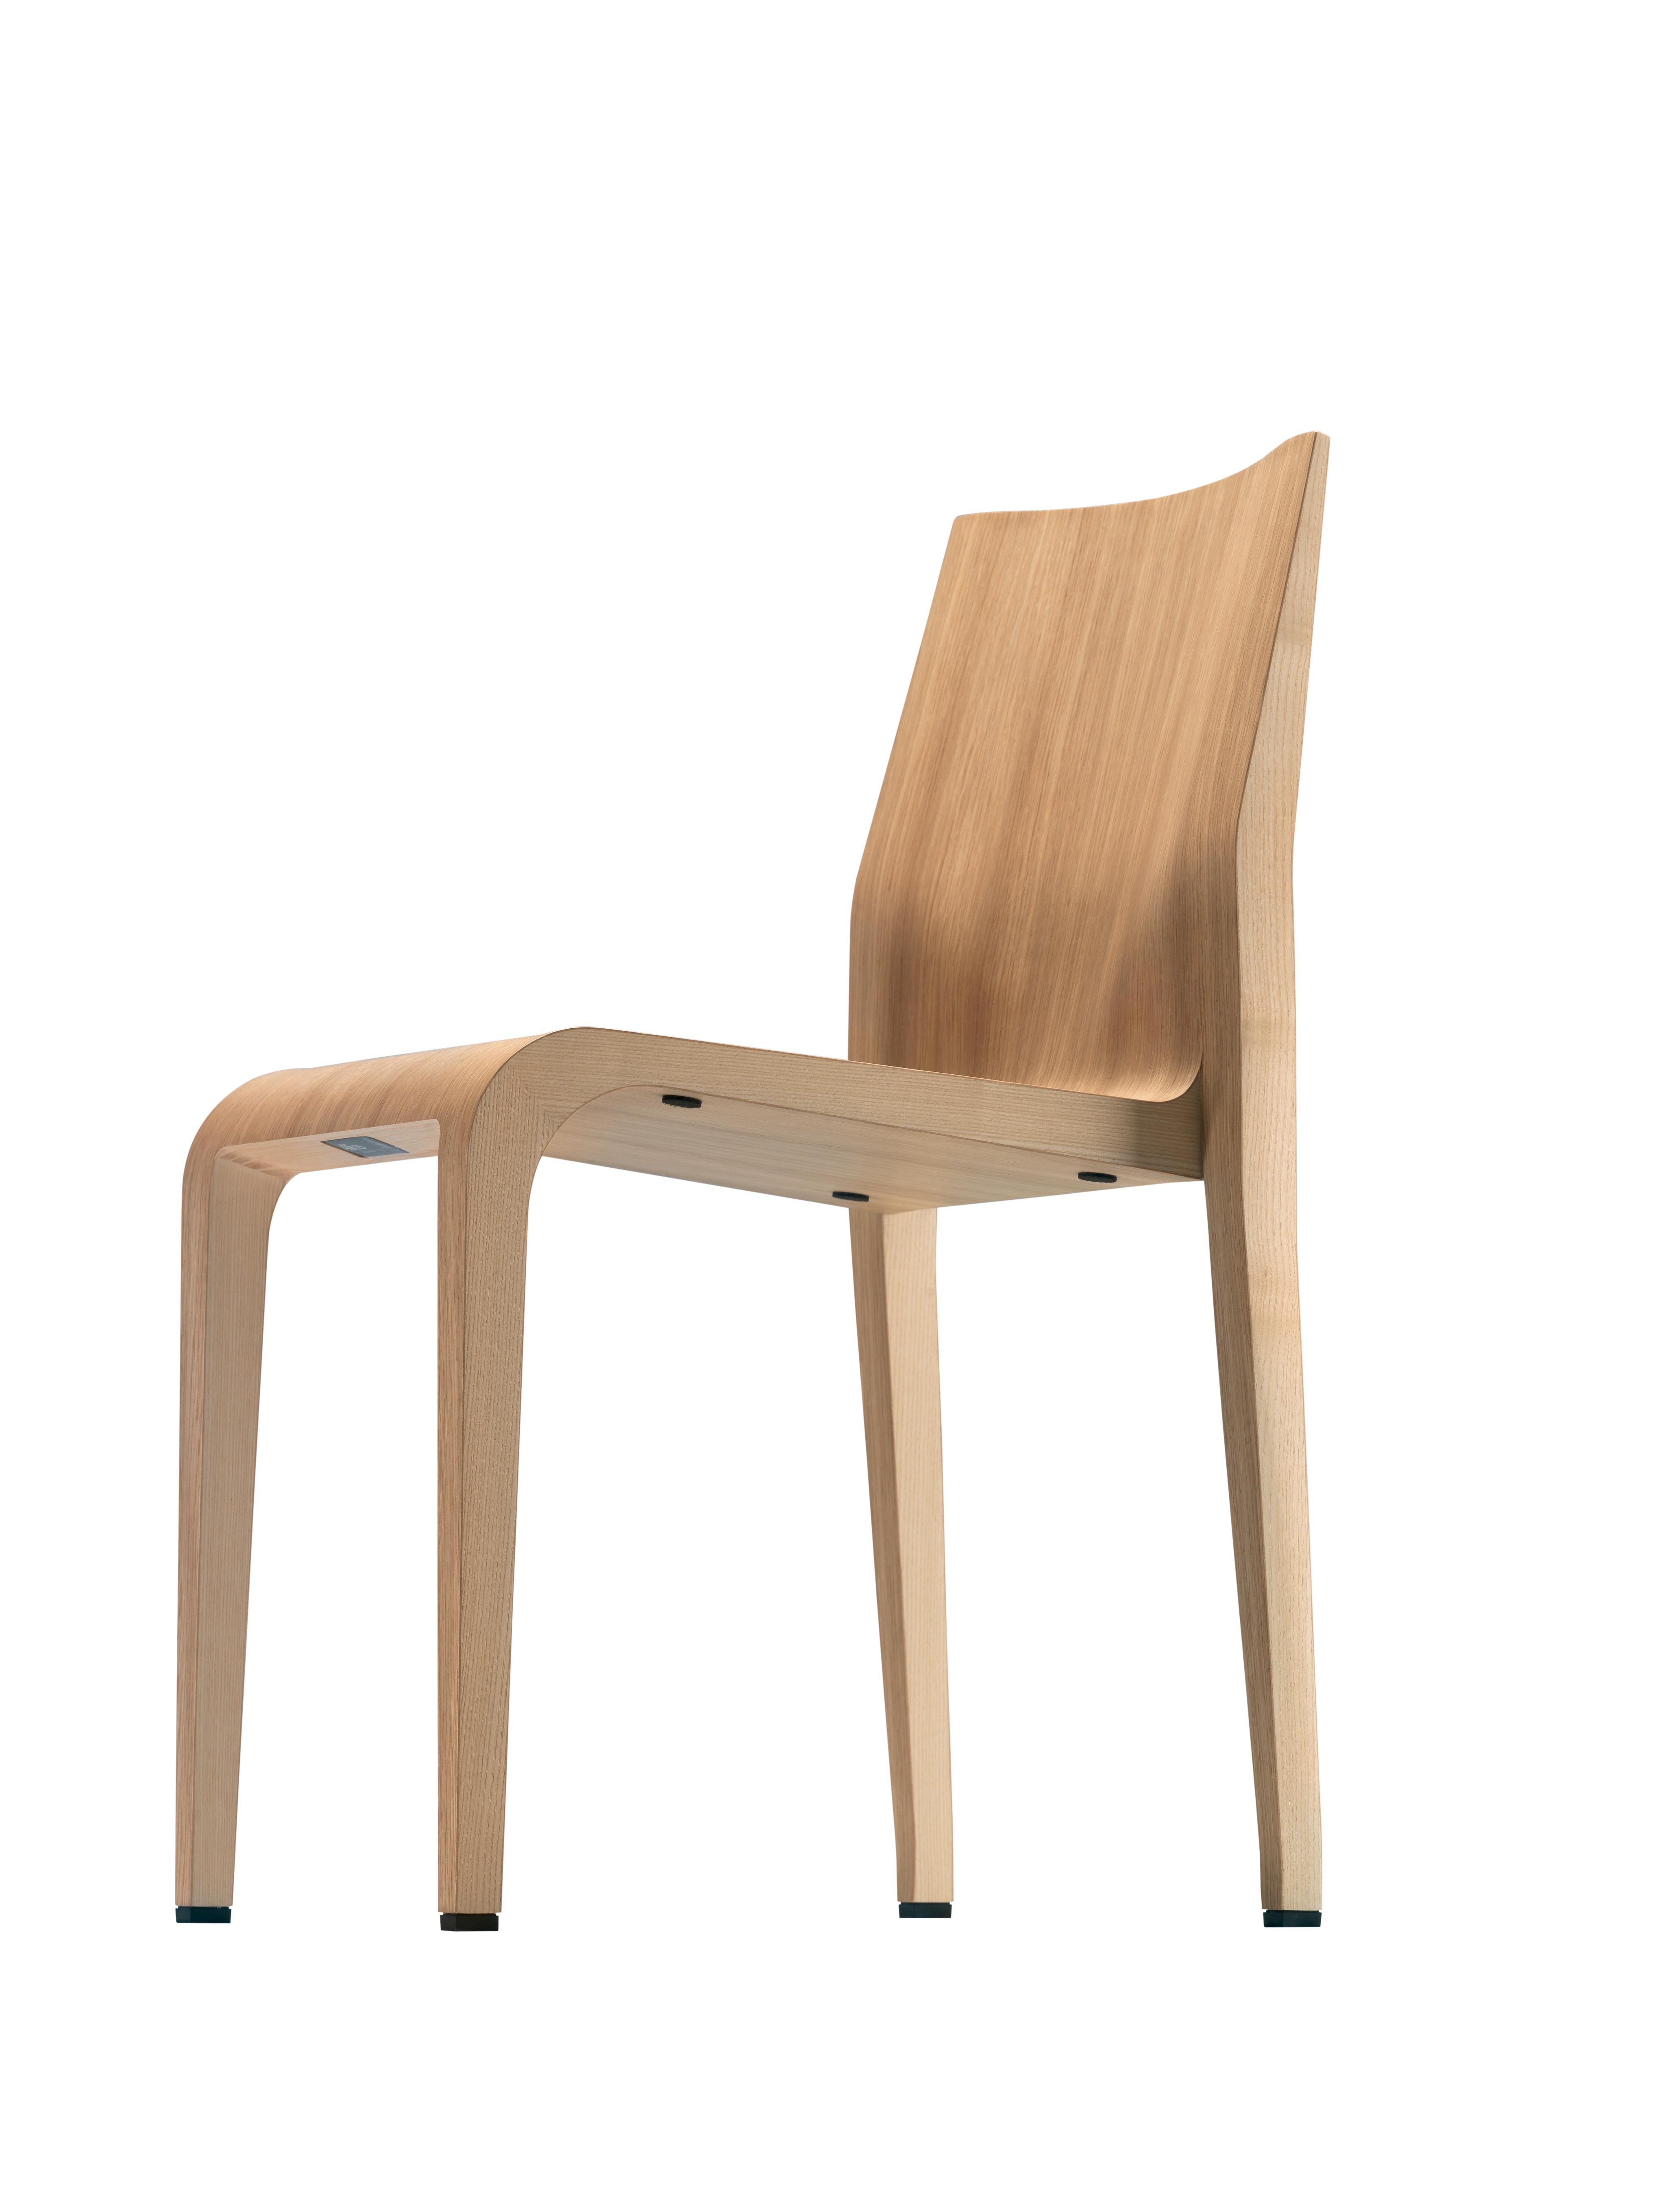 Alias 301 Laleggera Chair in Natural Oak Wood by Riccardo Blumer

Stacking chair with structure in solid maple or ash. Maple veneer or oak veneer. Internal support in injected polyurethane foam. Finish in transparent laquage or in colored stains.